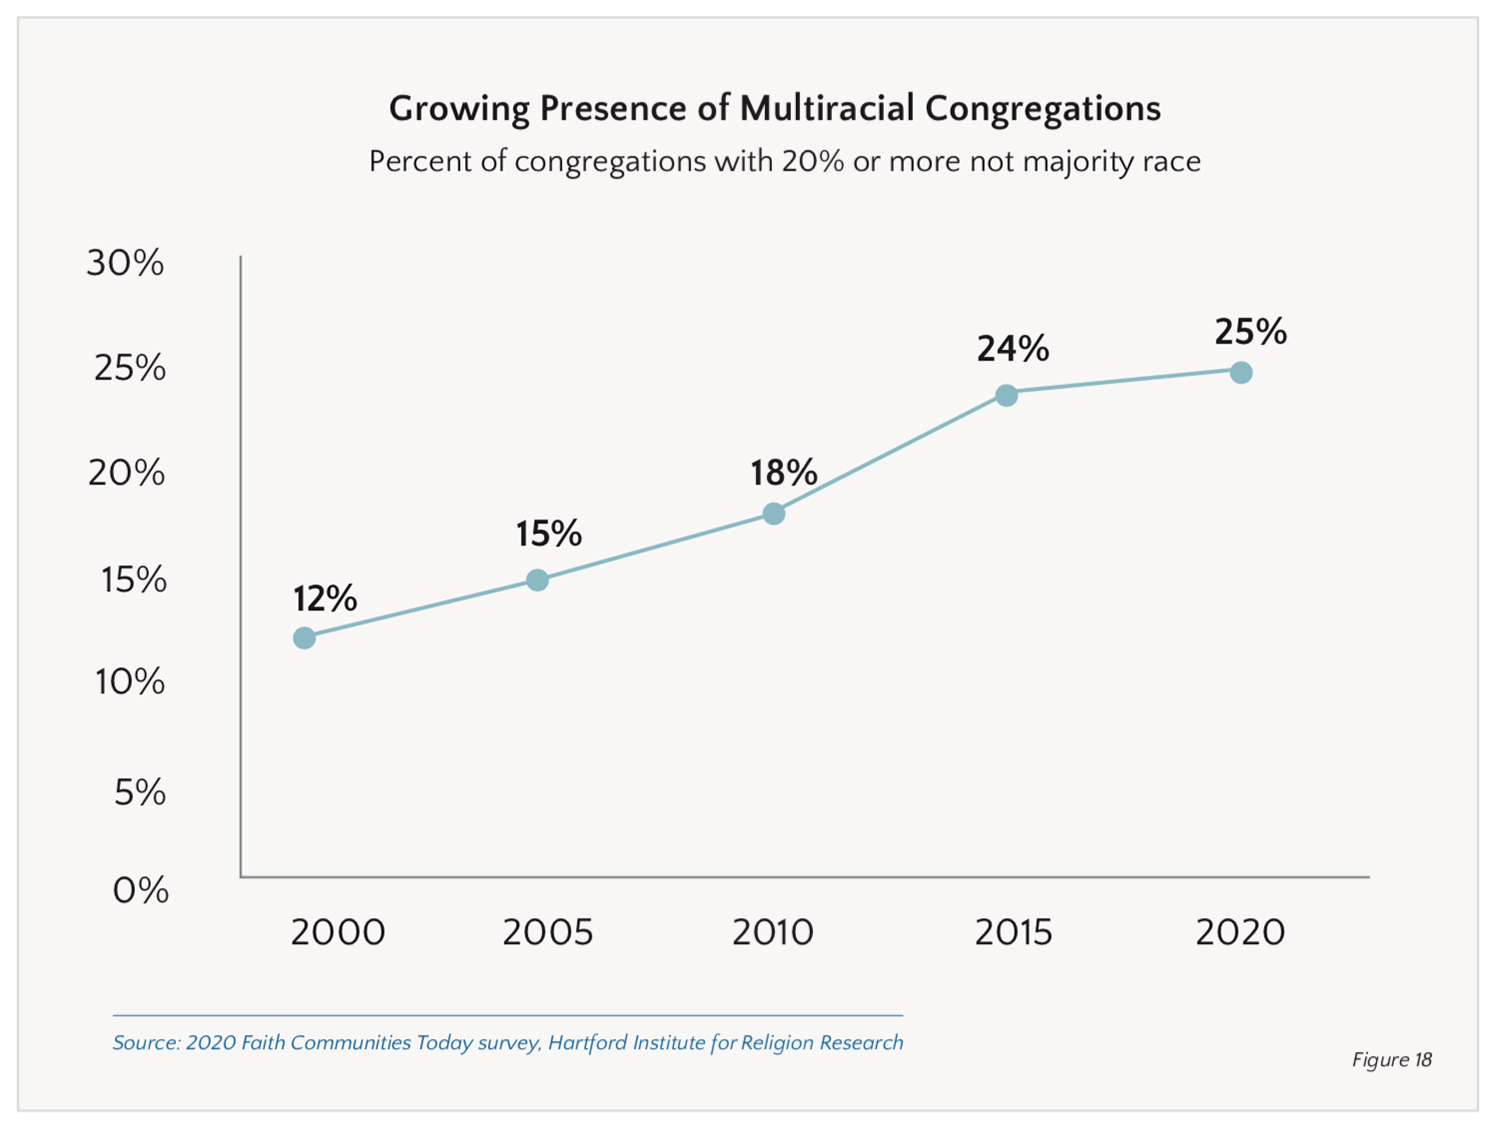 US congregations that are multiracial